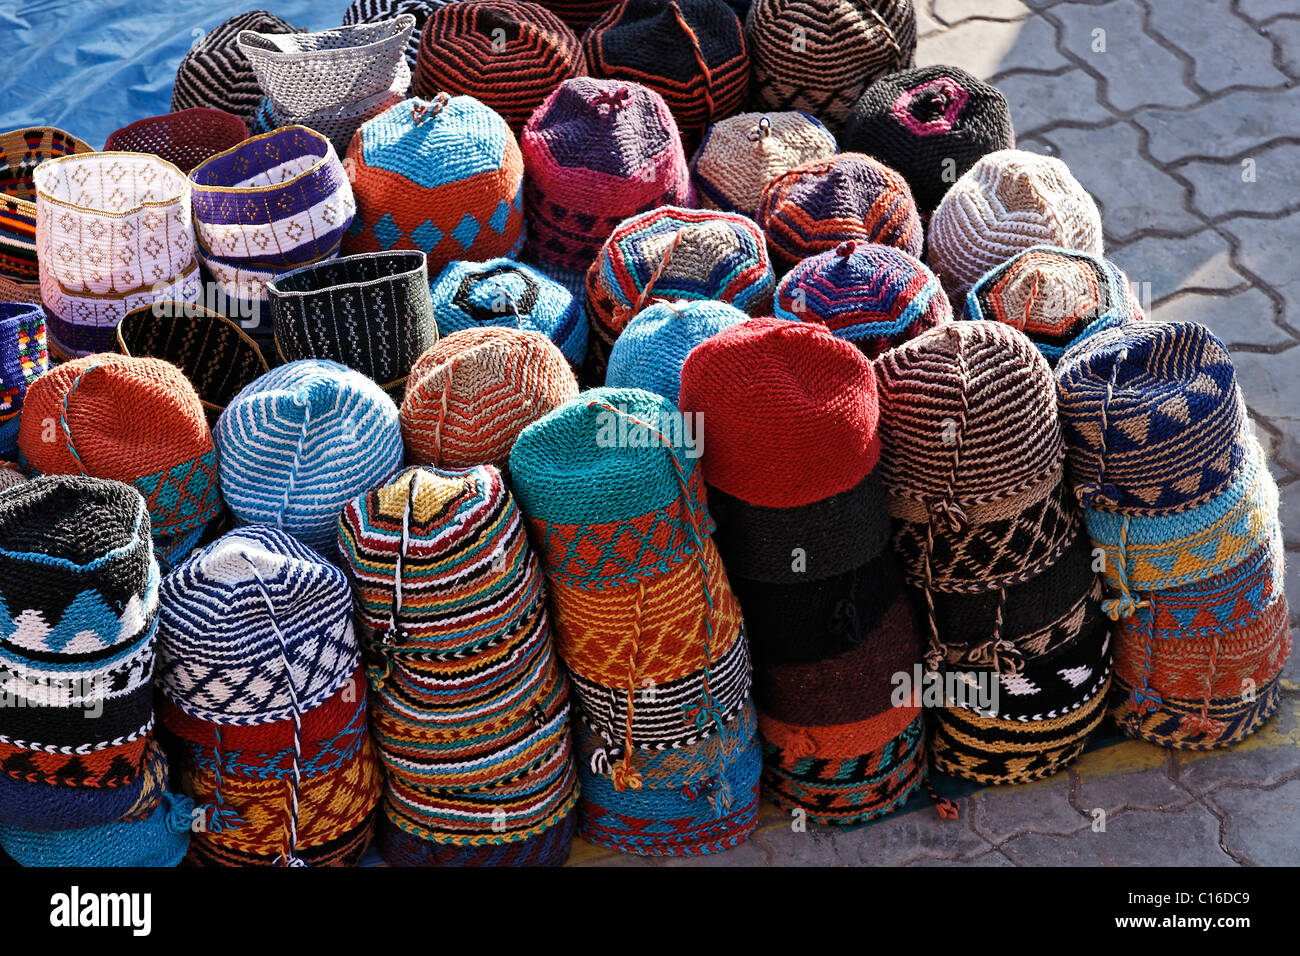 Pile of colorful Berber-wool caps, market square in Medina, Marrakesh, Morocco, North Africa Stock Photo